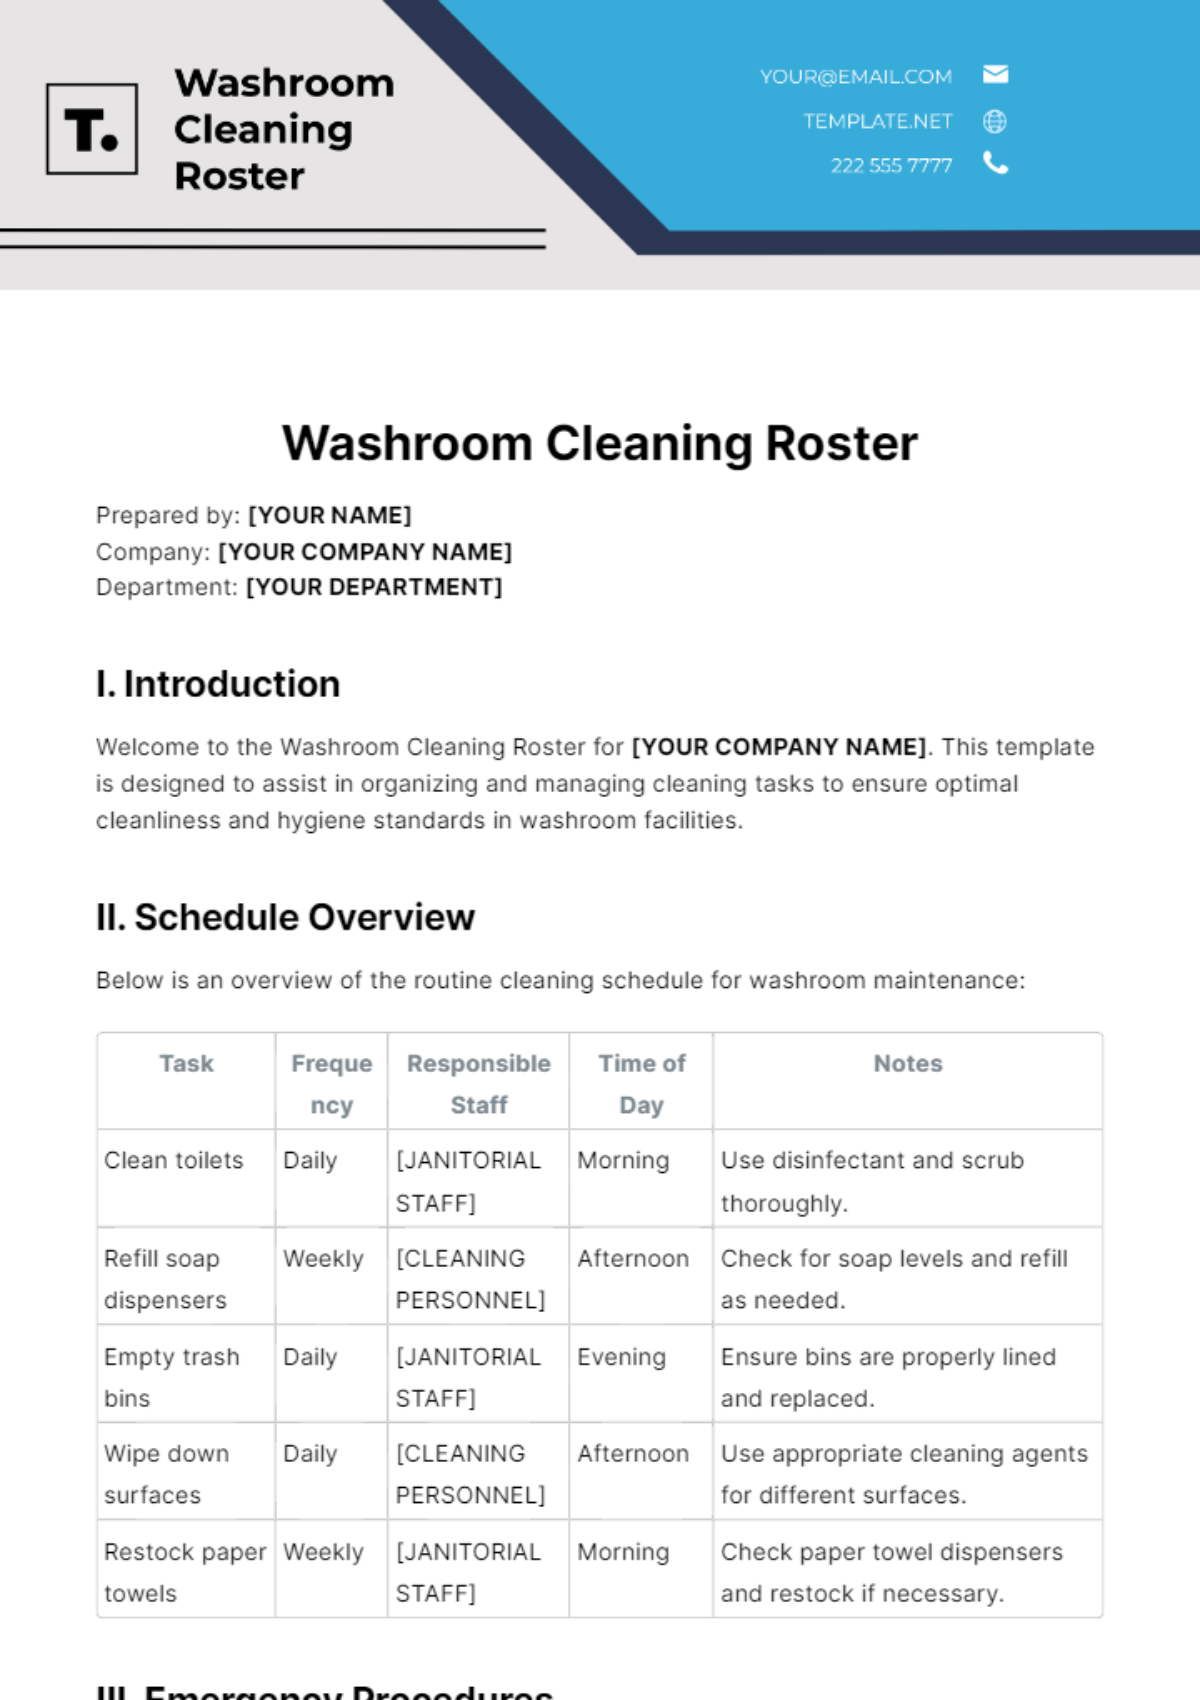 Free Washroom Cleaning Roster Template